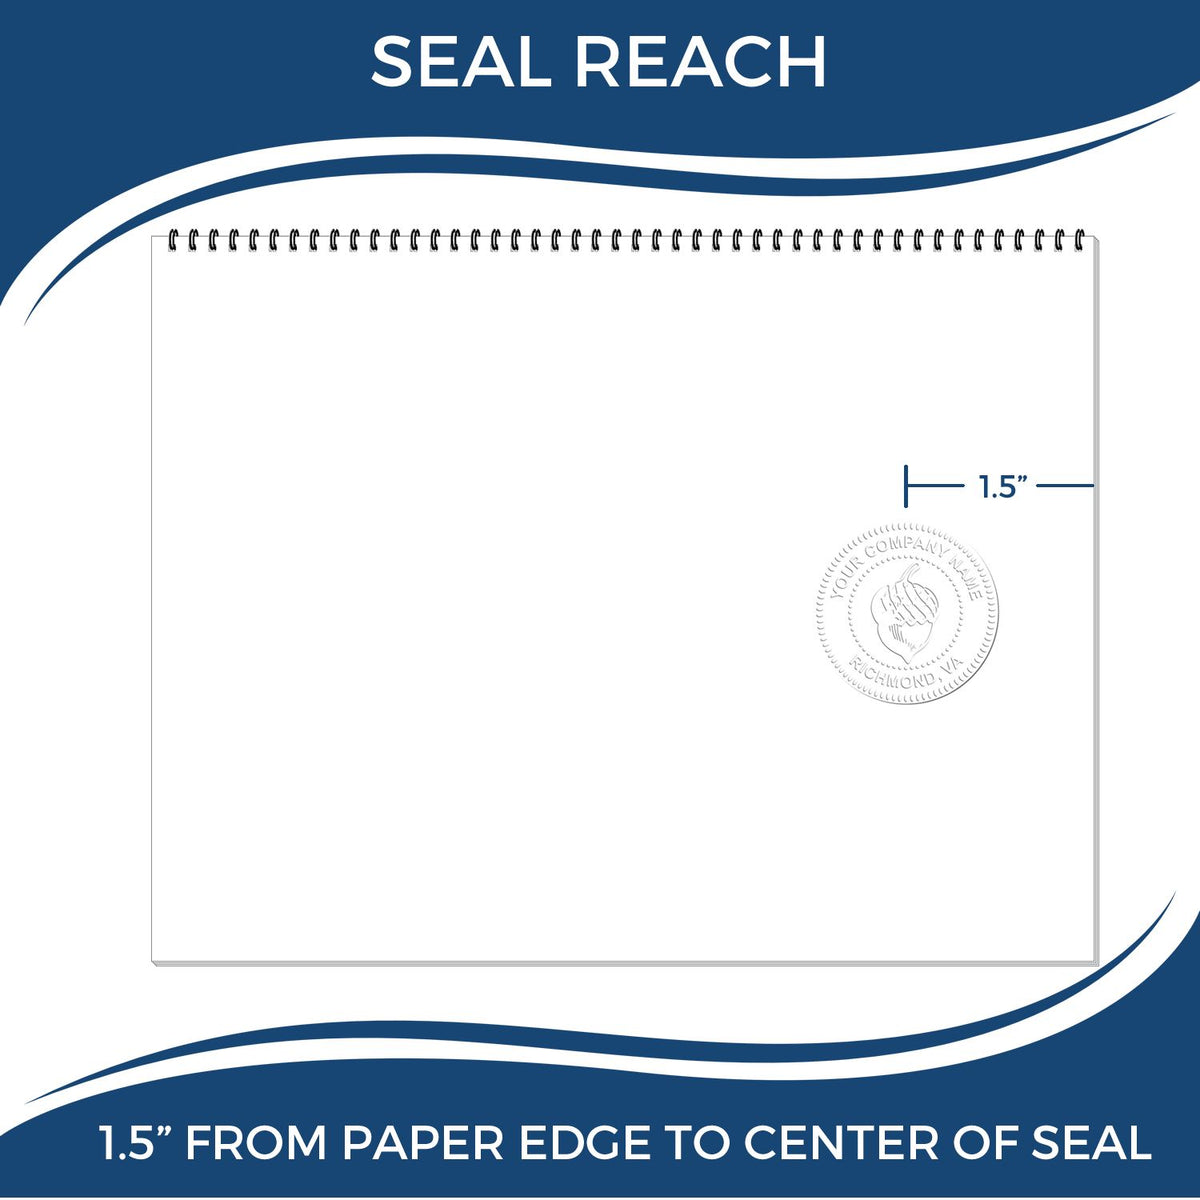 An infographic showing the seal reach which is represented by a ruler and a miniature seal image of the West Virginia Desk Architect Embossing Seal